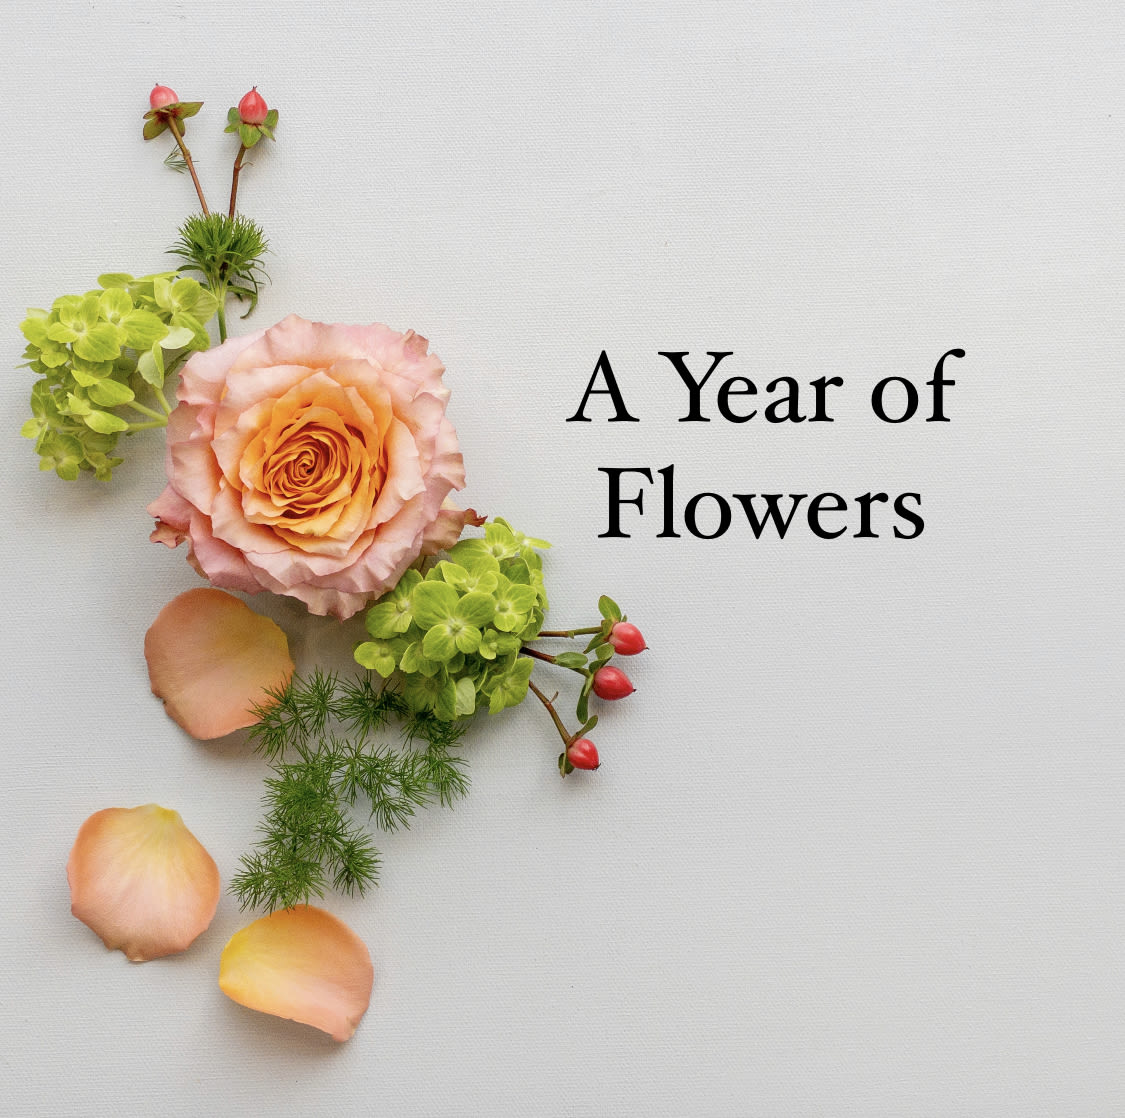 A Year of Flowers - The absolute ultimate gift, featuring 12 stunning Pittsford Florist arrangements delivered every month for one year. You can specify exactly what you would like, or you can leave it to our creative team to inspire and surprise you each month. Minimum $1200, delivery &amp; tax not included.